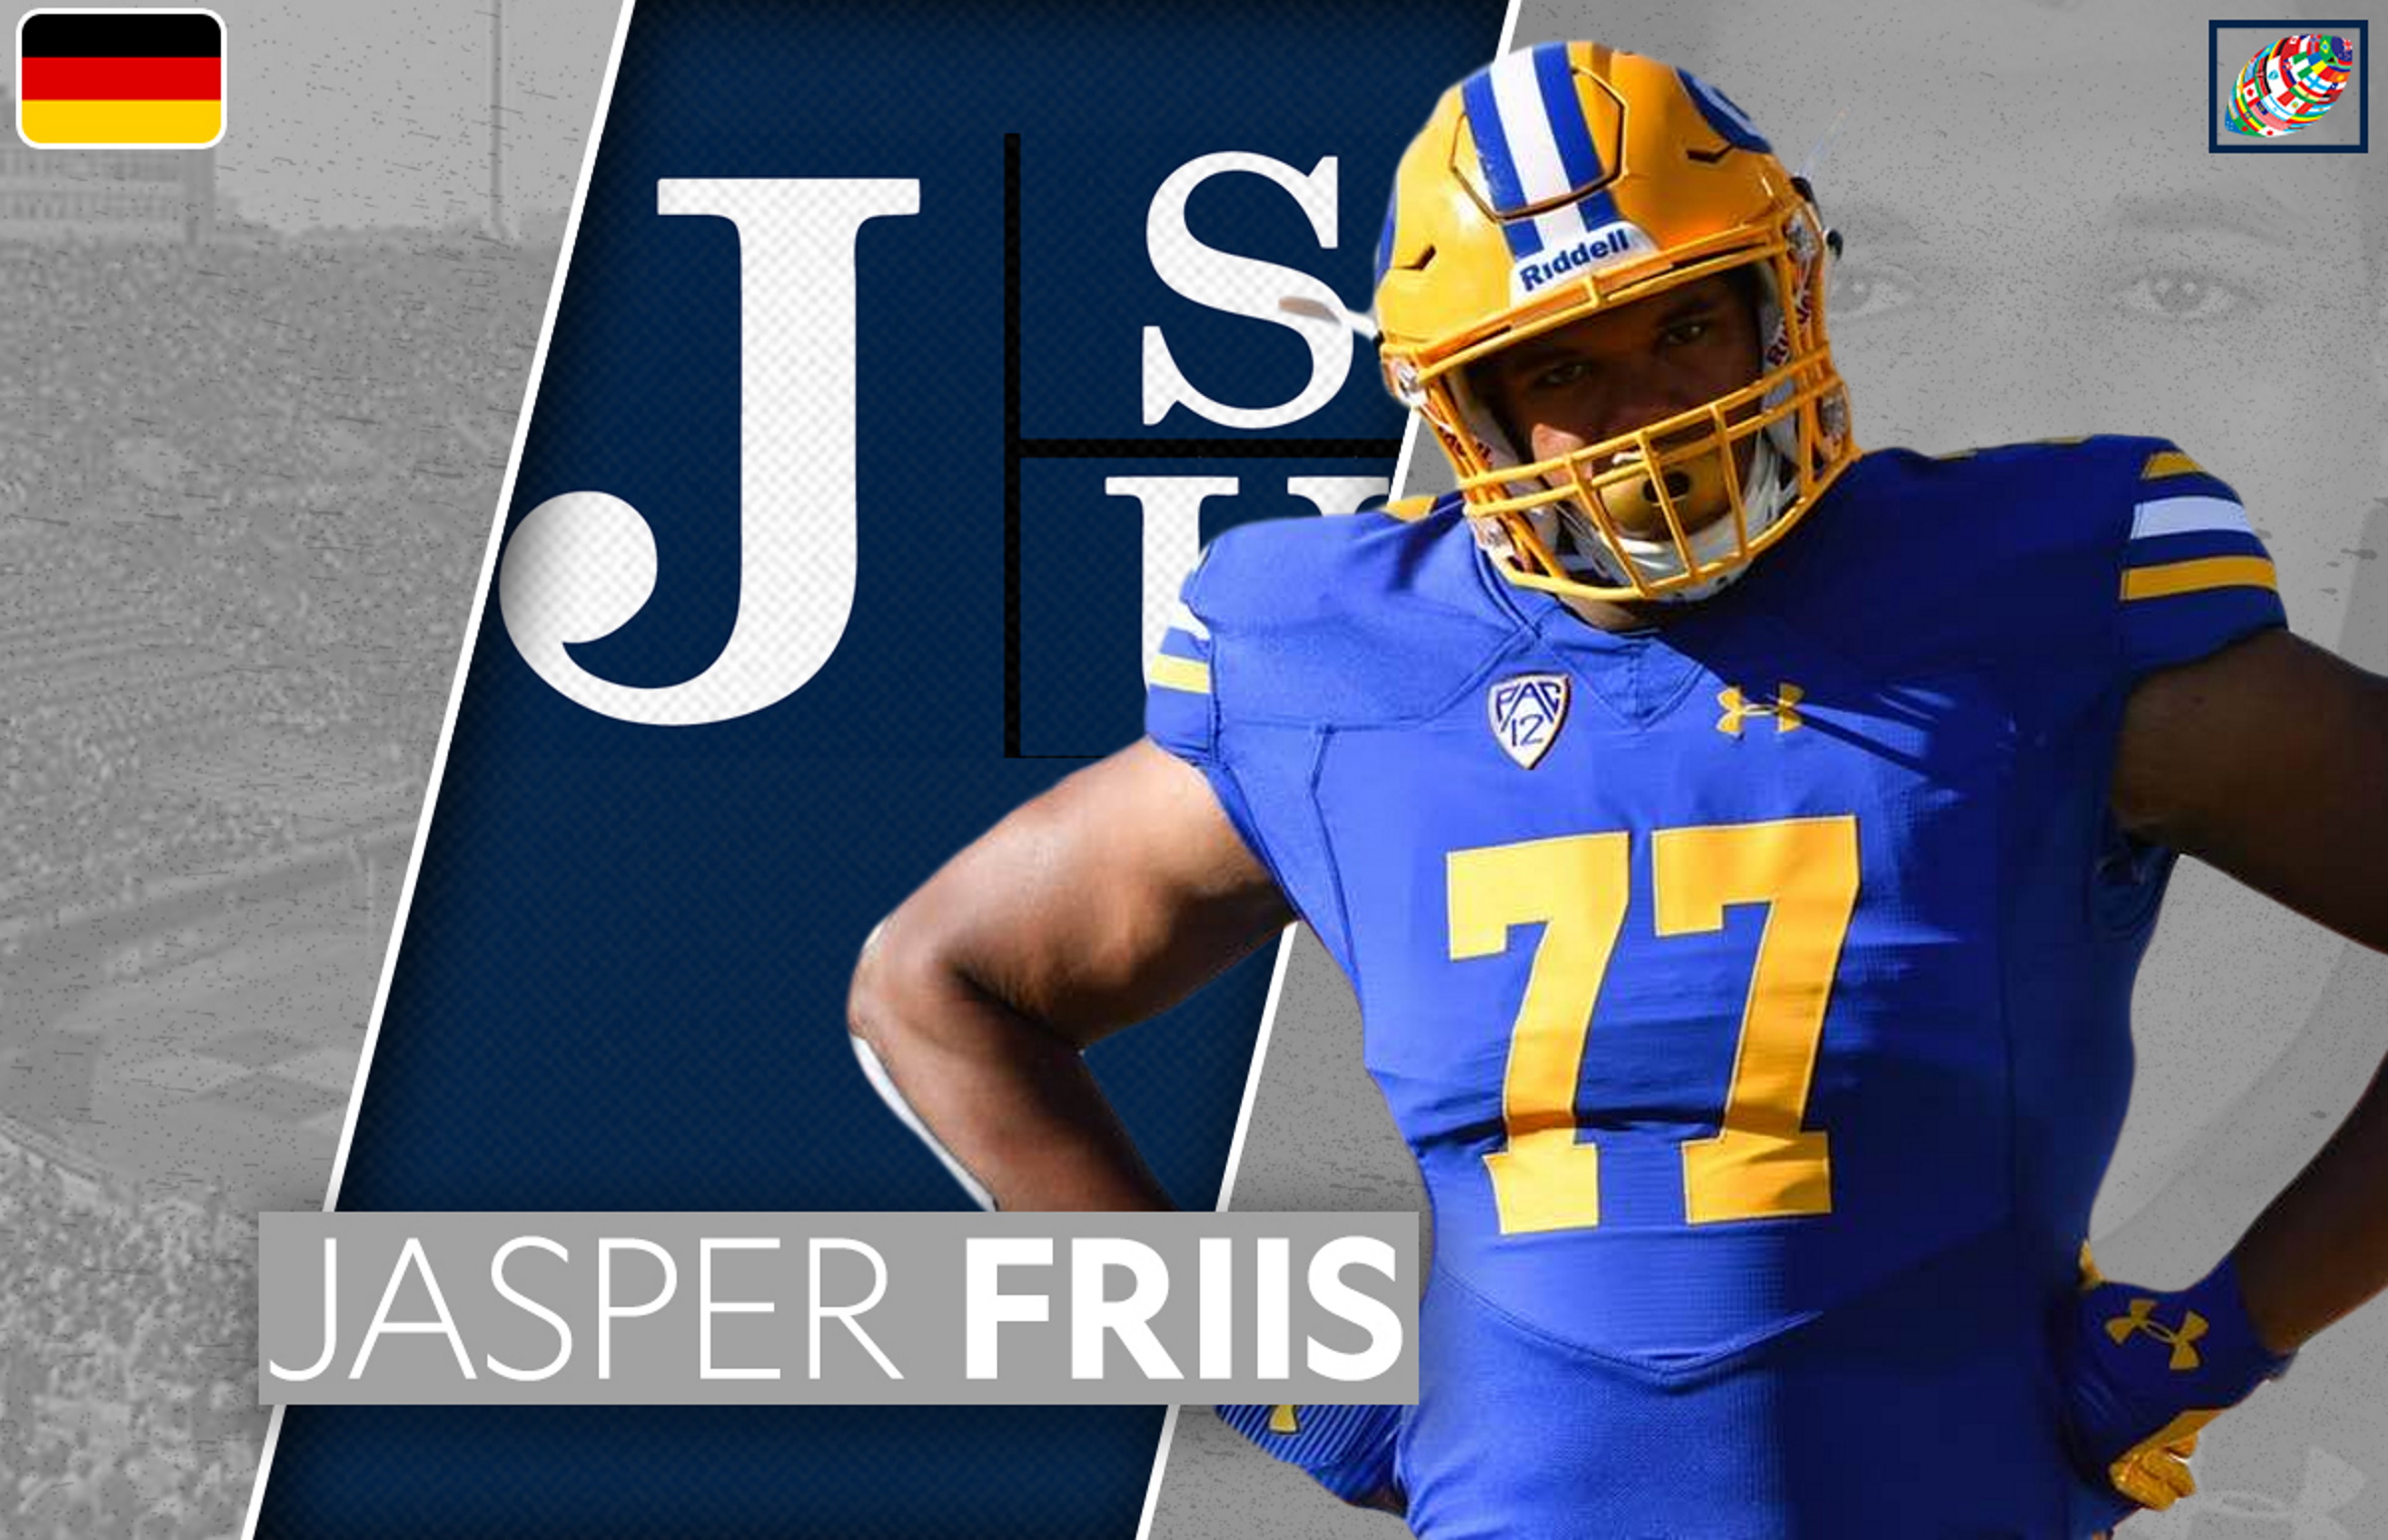 German offensive lineman Jasper Friis commits to Deion Sanders and